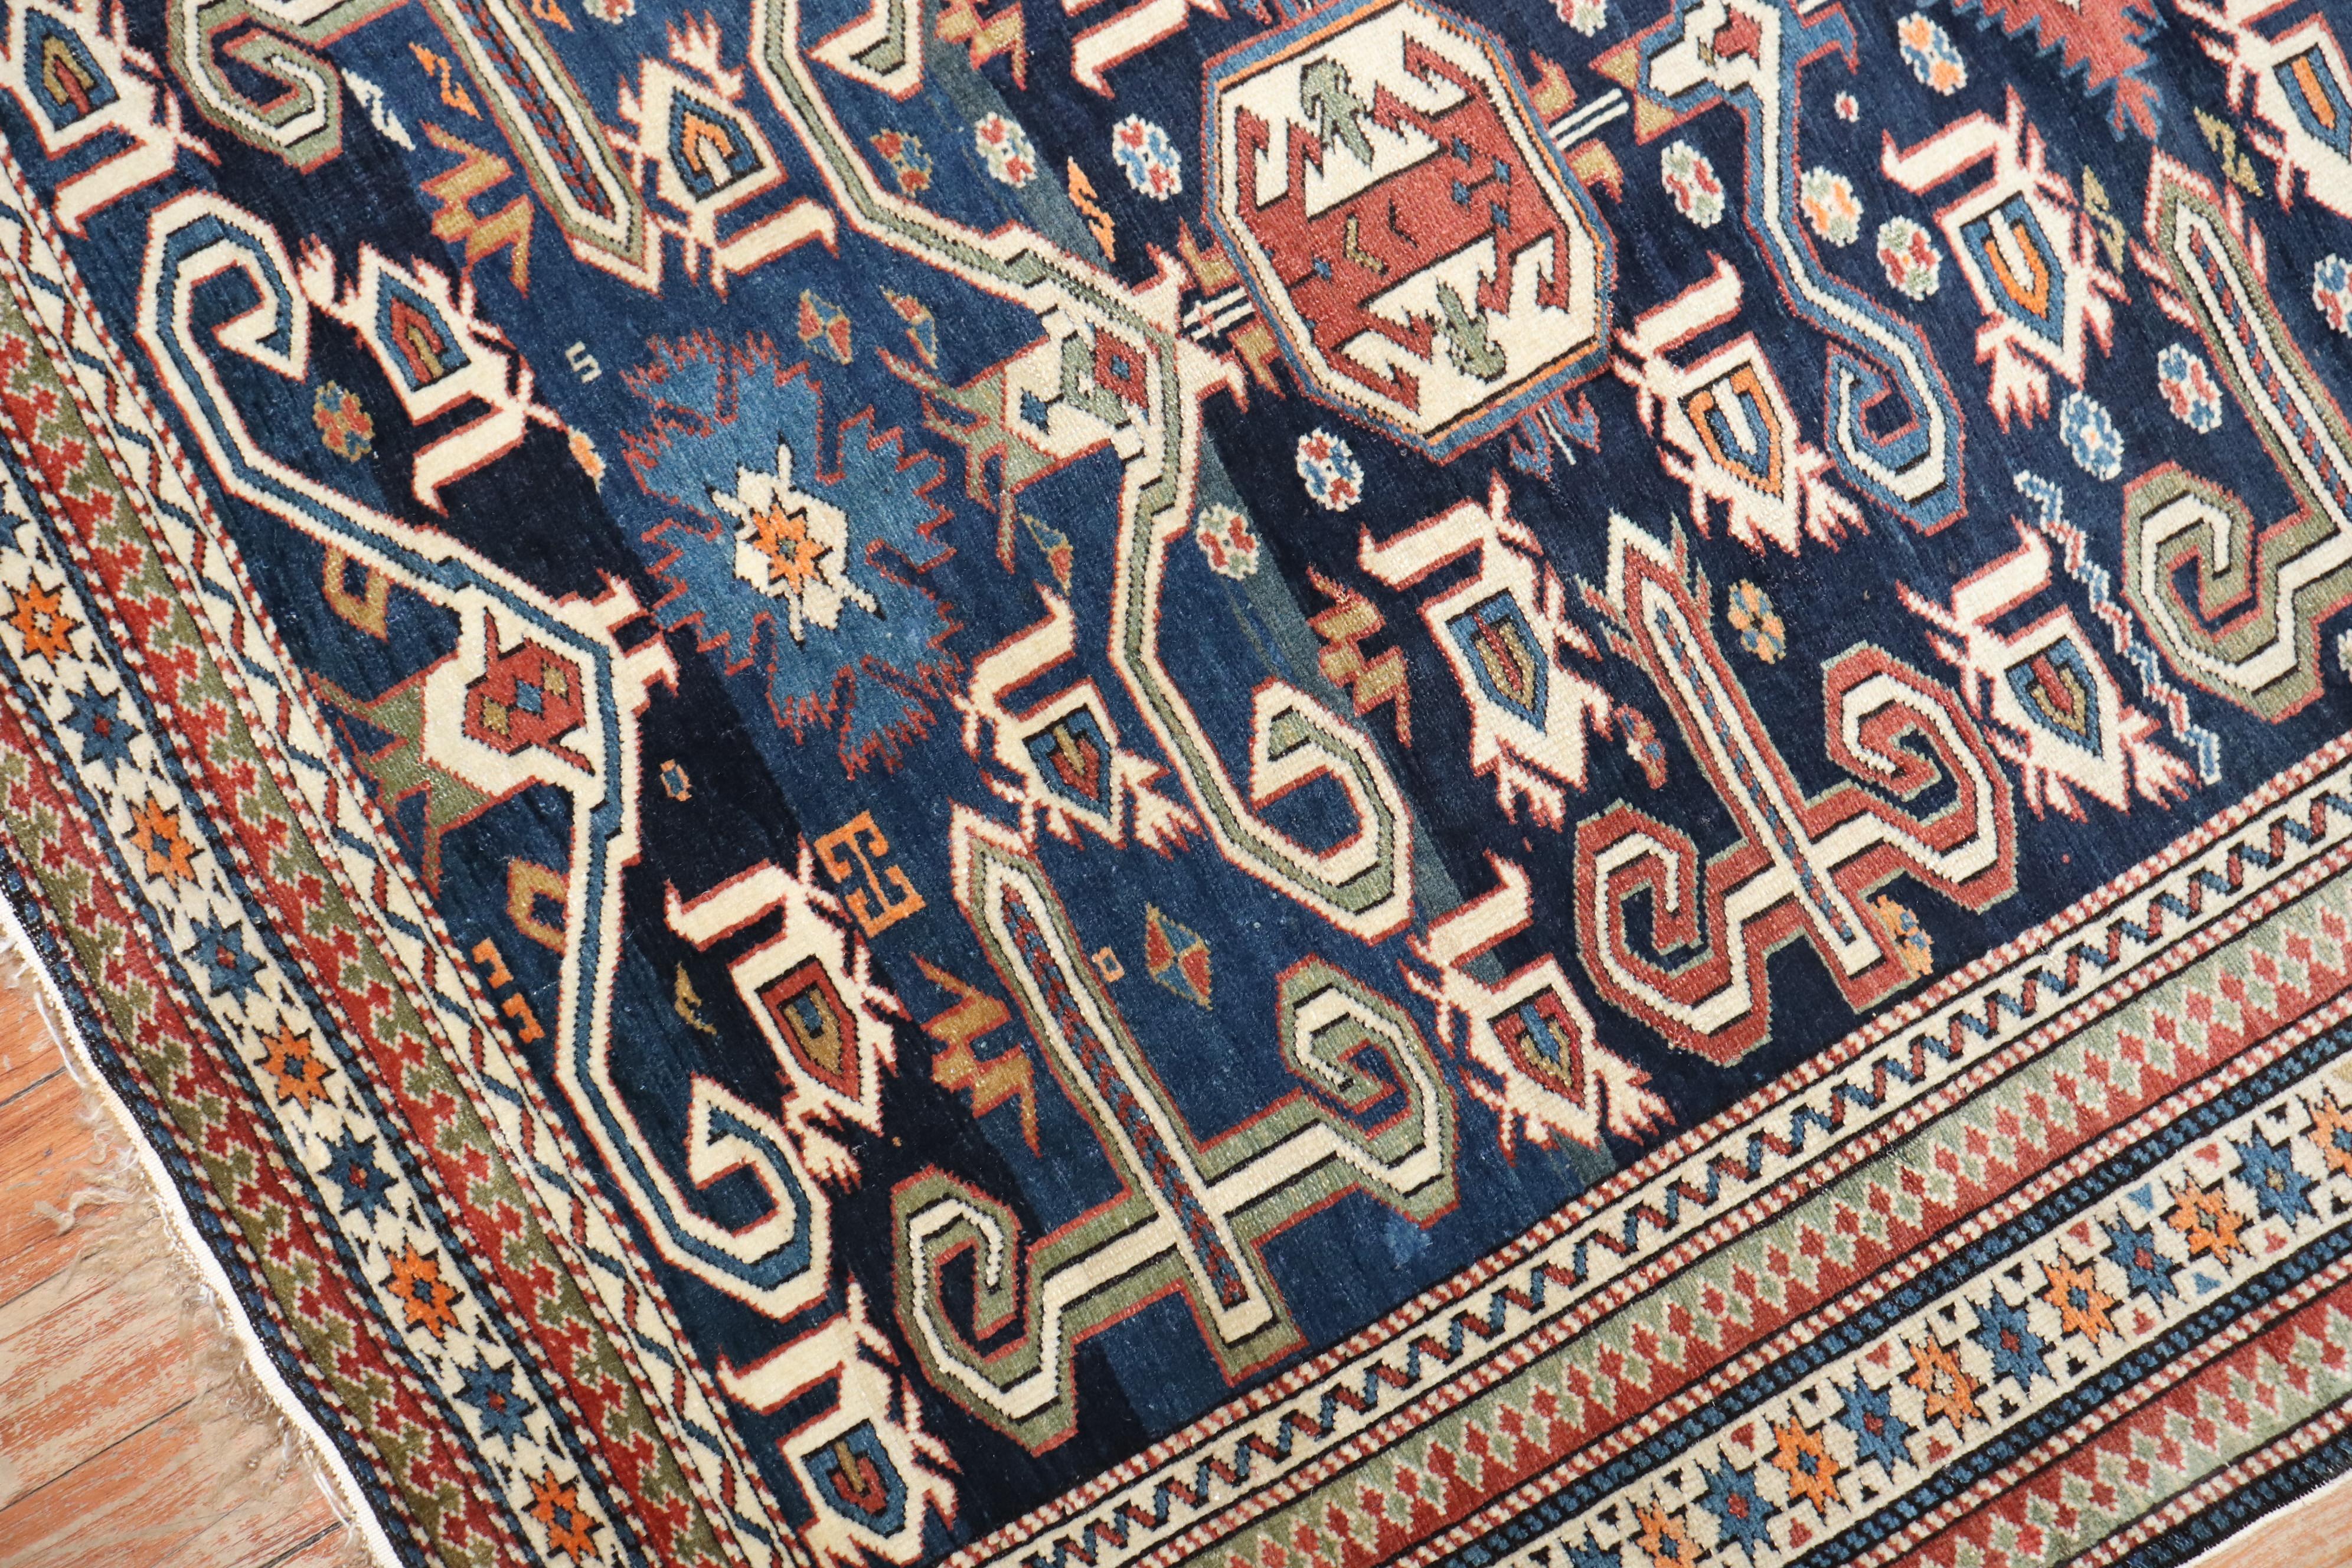 An authentic blue antique Caucasian perdedil rug from 1st quarter of the 20th century

Measures: 3'5